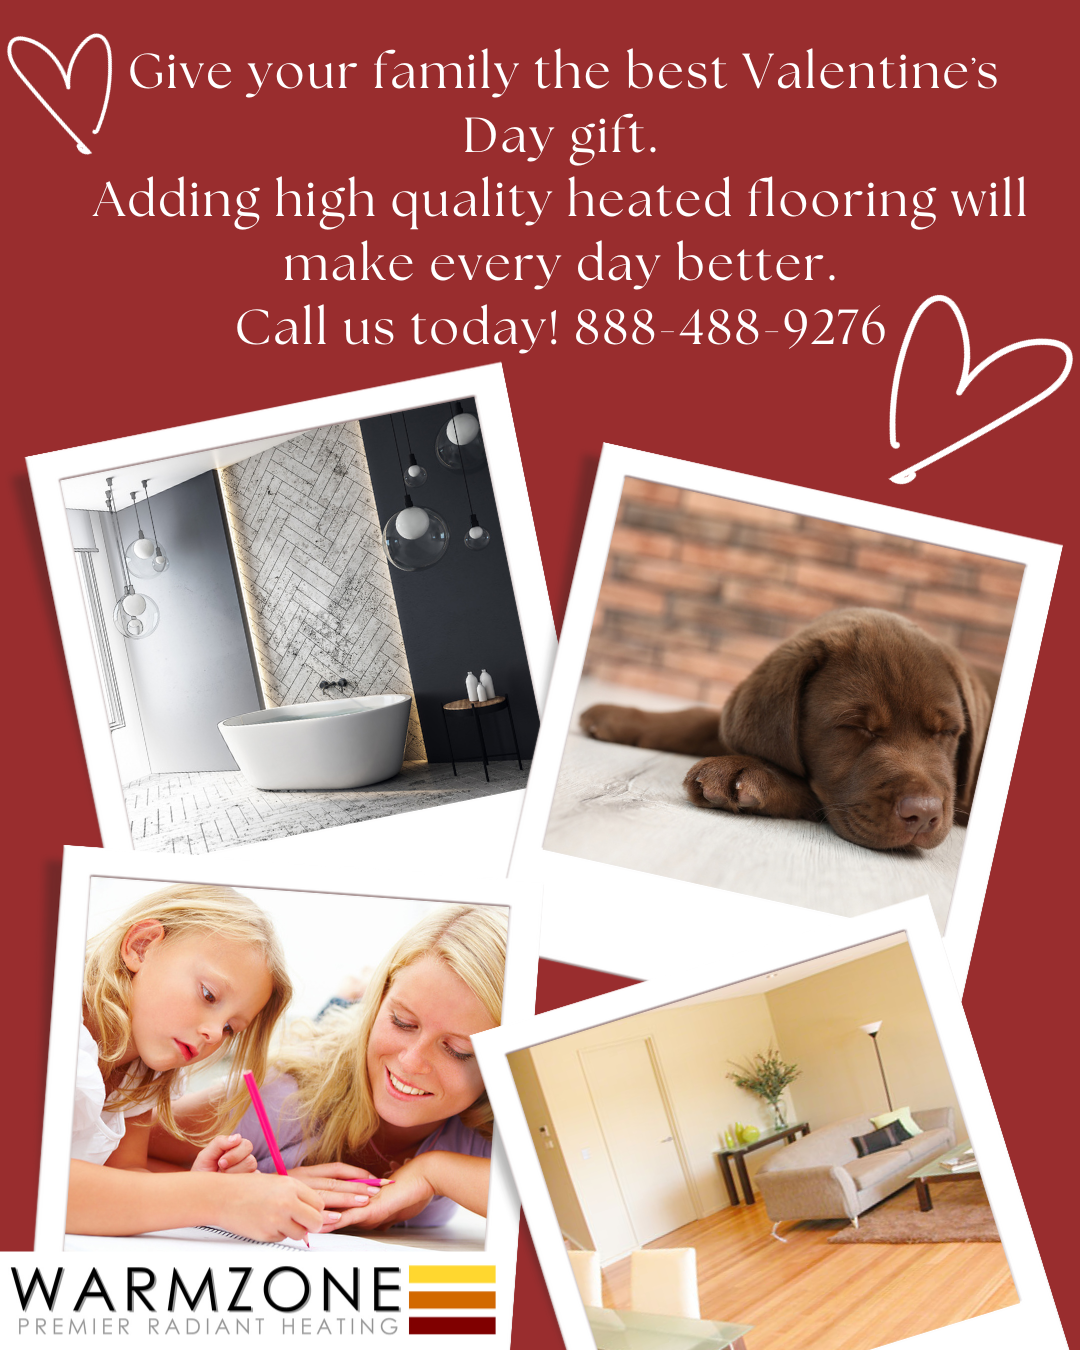 High quality radiant floor heating systems.